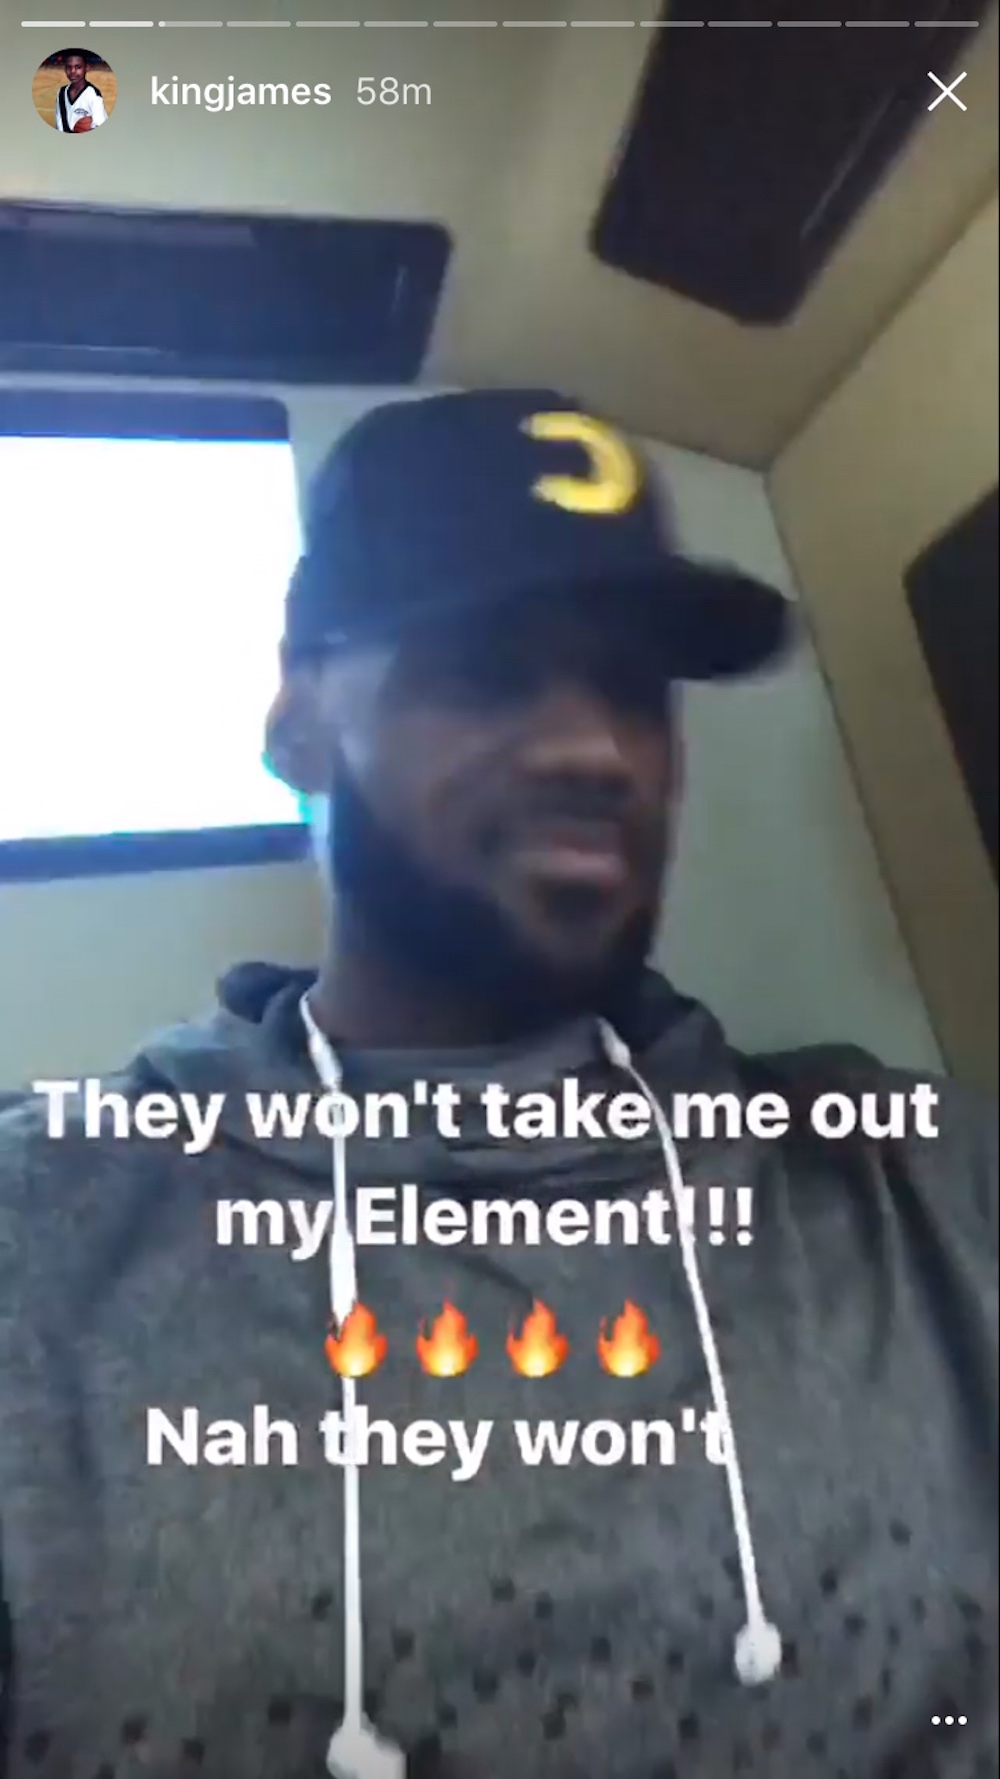 What We Learned About Kendrick Lamar's <i></noscript>DAMN.</i> From LeBron James’ Instagram” title=”element” data-original-id=”235168″ data-adjusted-id=”235168″ class=”sm_size_full_width sm_alignment_center ” />
<p><strong>“FEEL.” seems like another introspective Lamar joint.</strong></p>
<p>Like <em>TPAB</em>‘s “u,” “FEEL.” could be another stream-of-consciousness piece where Lamar confronts his anxieties. It sounds like a bleak piece of introspection with Lamar brooding “I feel like the world ending and fuck you if you get offended.” The rhyme scheme centers around the song’s title and features a subdued, melancholic groove. “FEEL.” is also produced by frequent collaborator Sounwave.</p>
<img src=